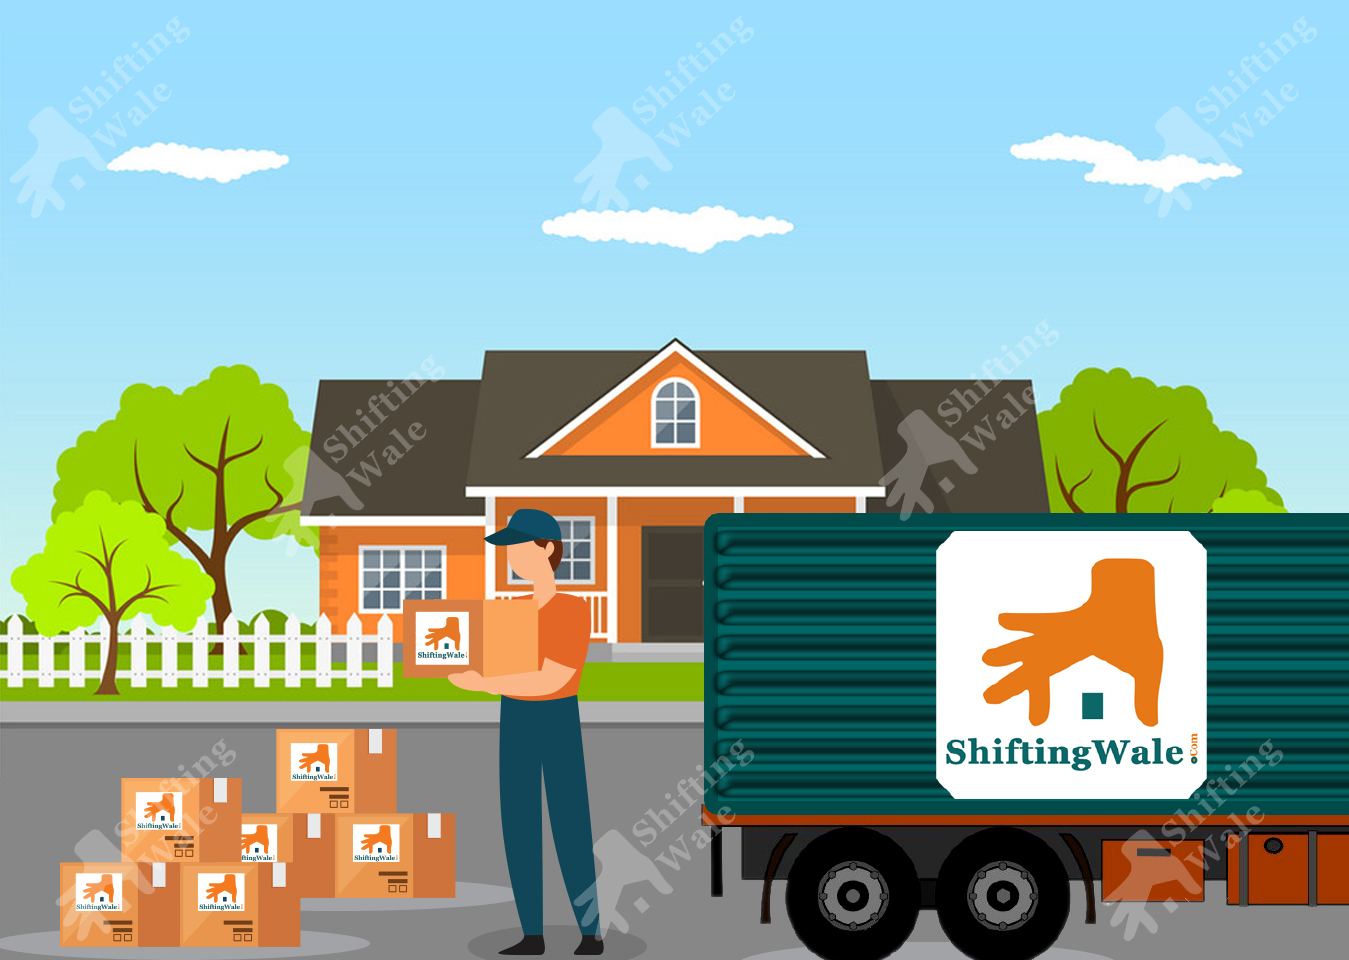 Best Packers And Movers Noida, Movers And Packers In Noida, Packing And Moving Services In Noida